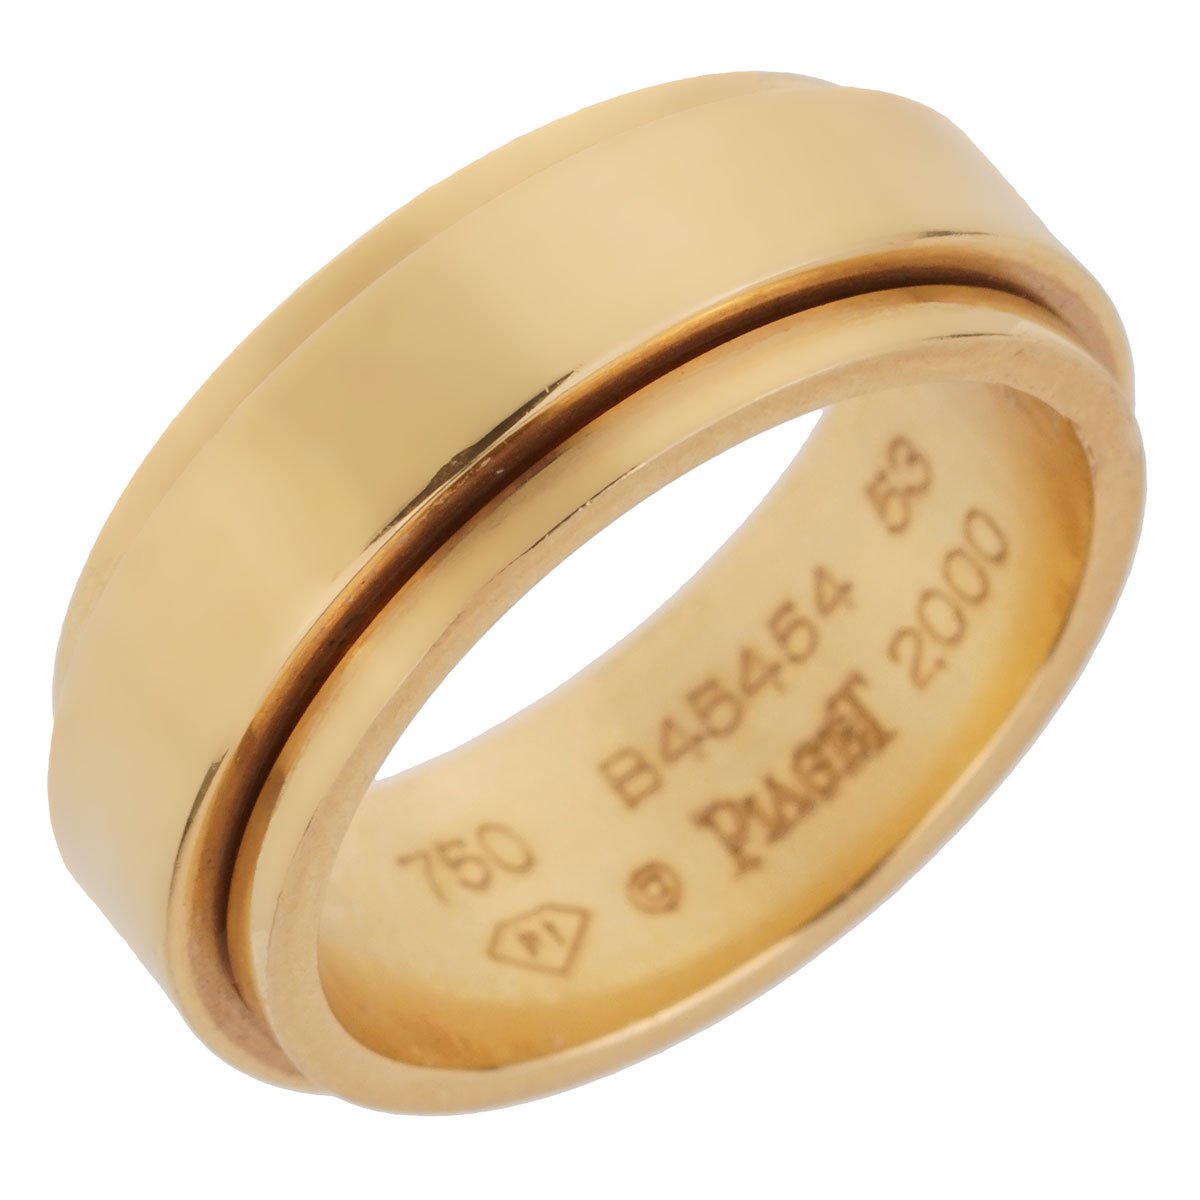 Fine jewellery's new spin: Piaget Possession turning rings